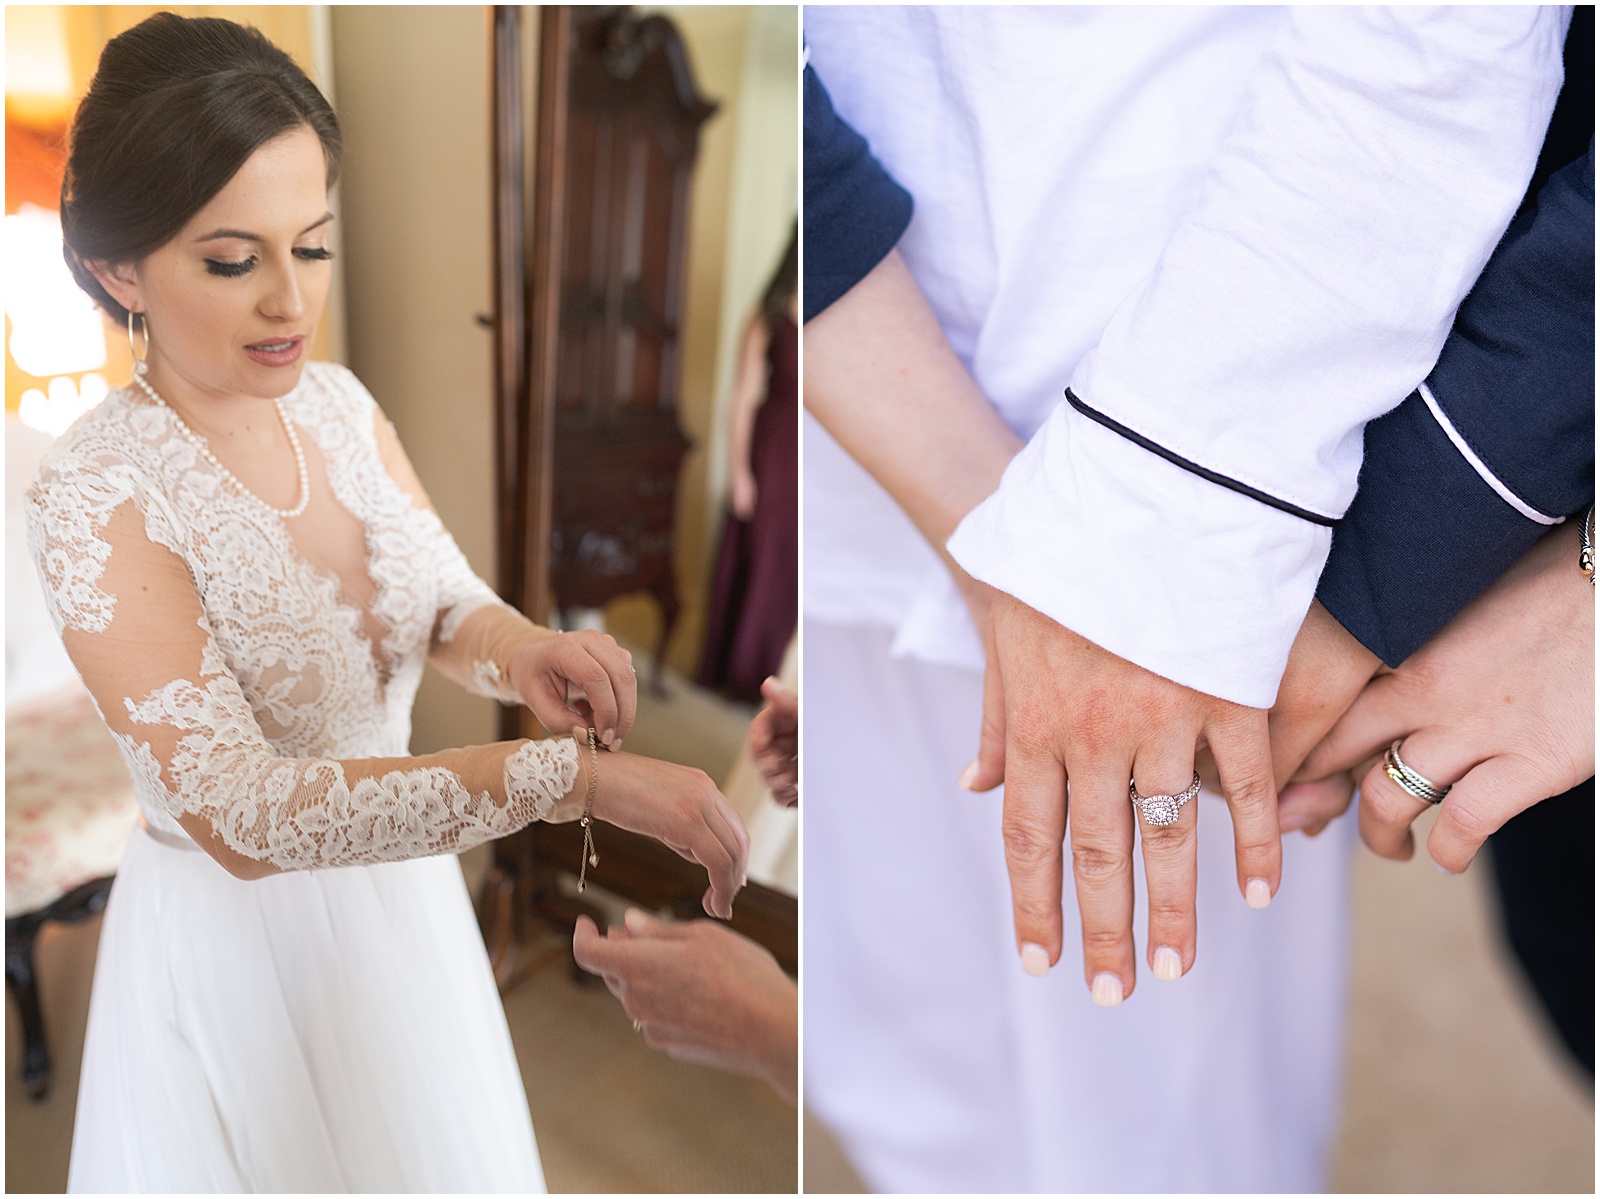 Getting ready and detail photos at Ashelynn Manor | Swish and Click Photography